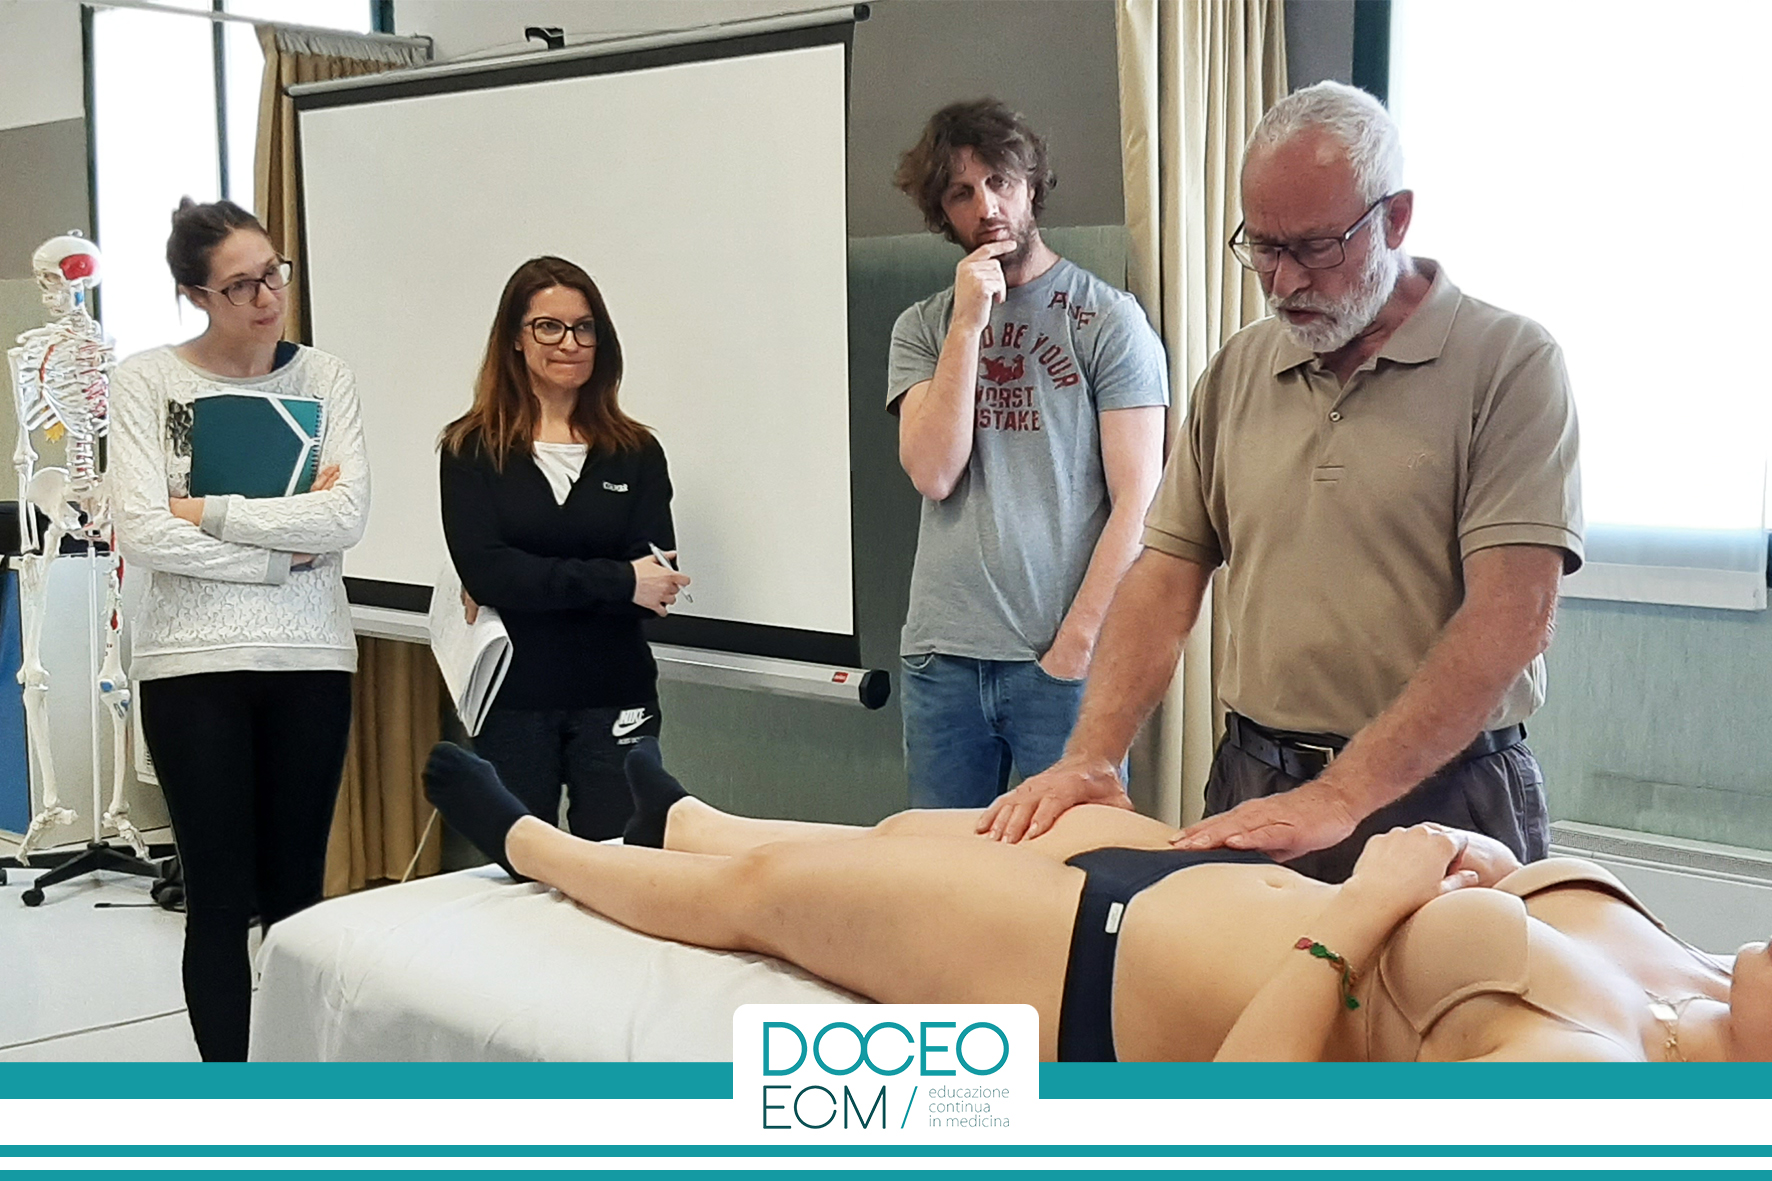 FUNCTIONAL POSTURE IN MOTION - Doceo ECM